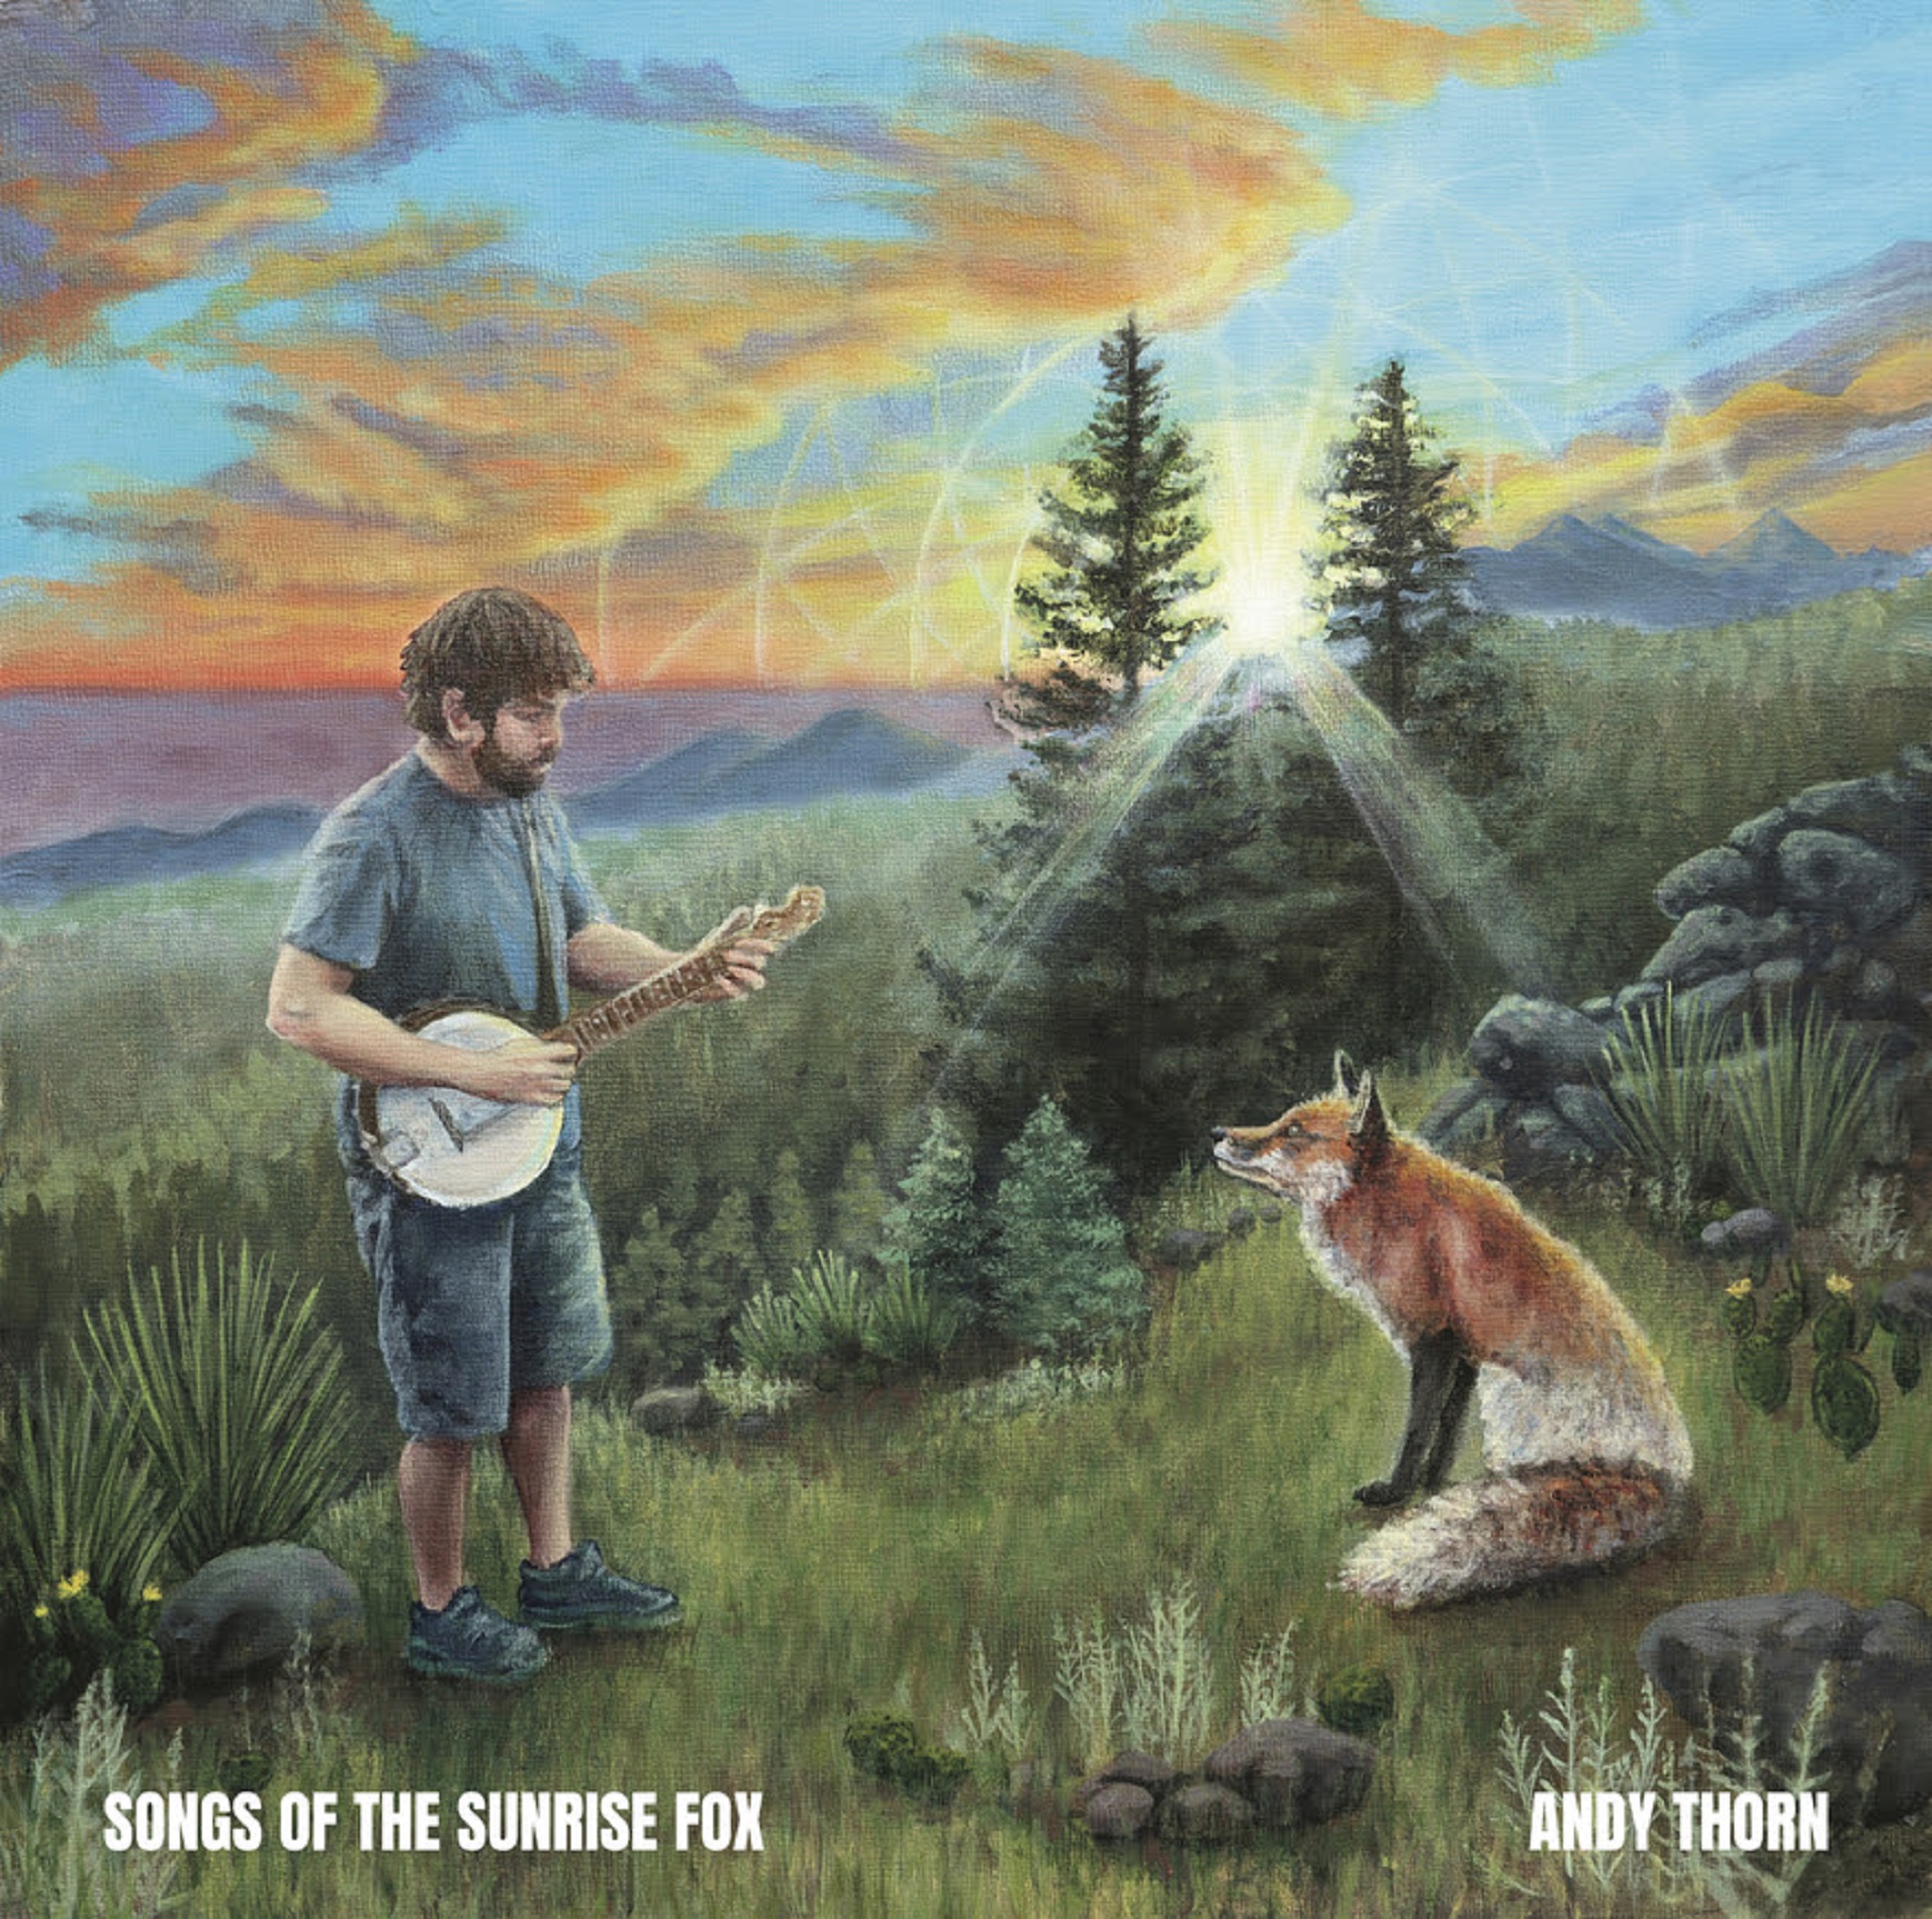 Leftover Salmon’s Andy Thorn Releases ‘Songs of the Sunrise Fox’ Today 9/16